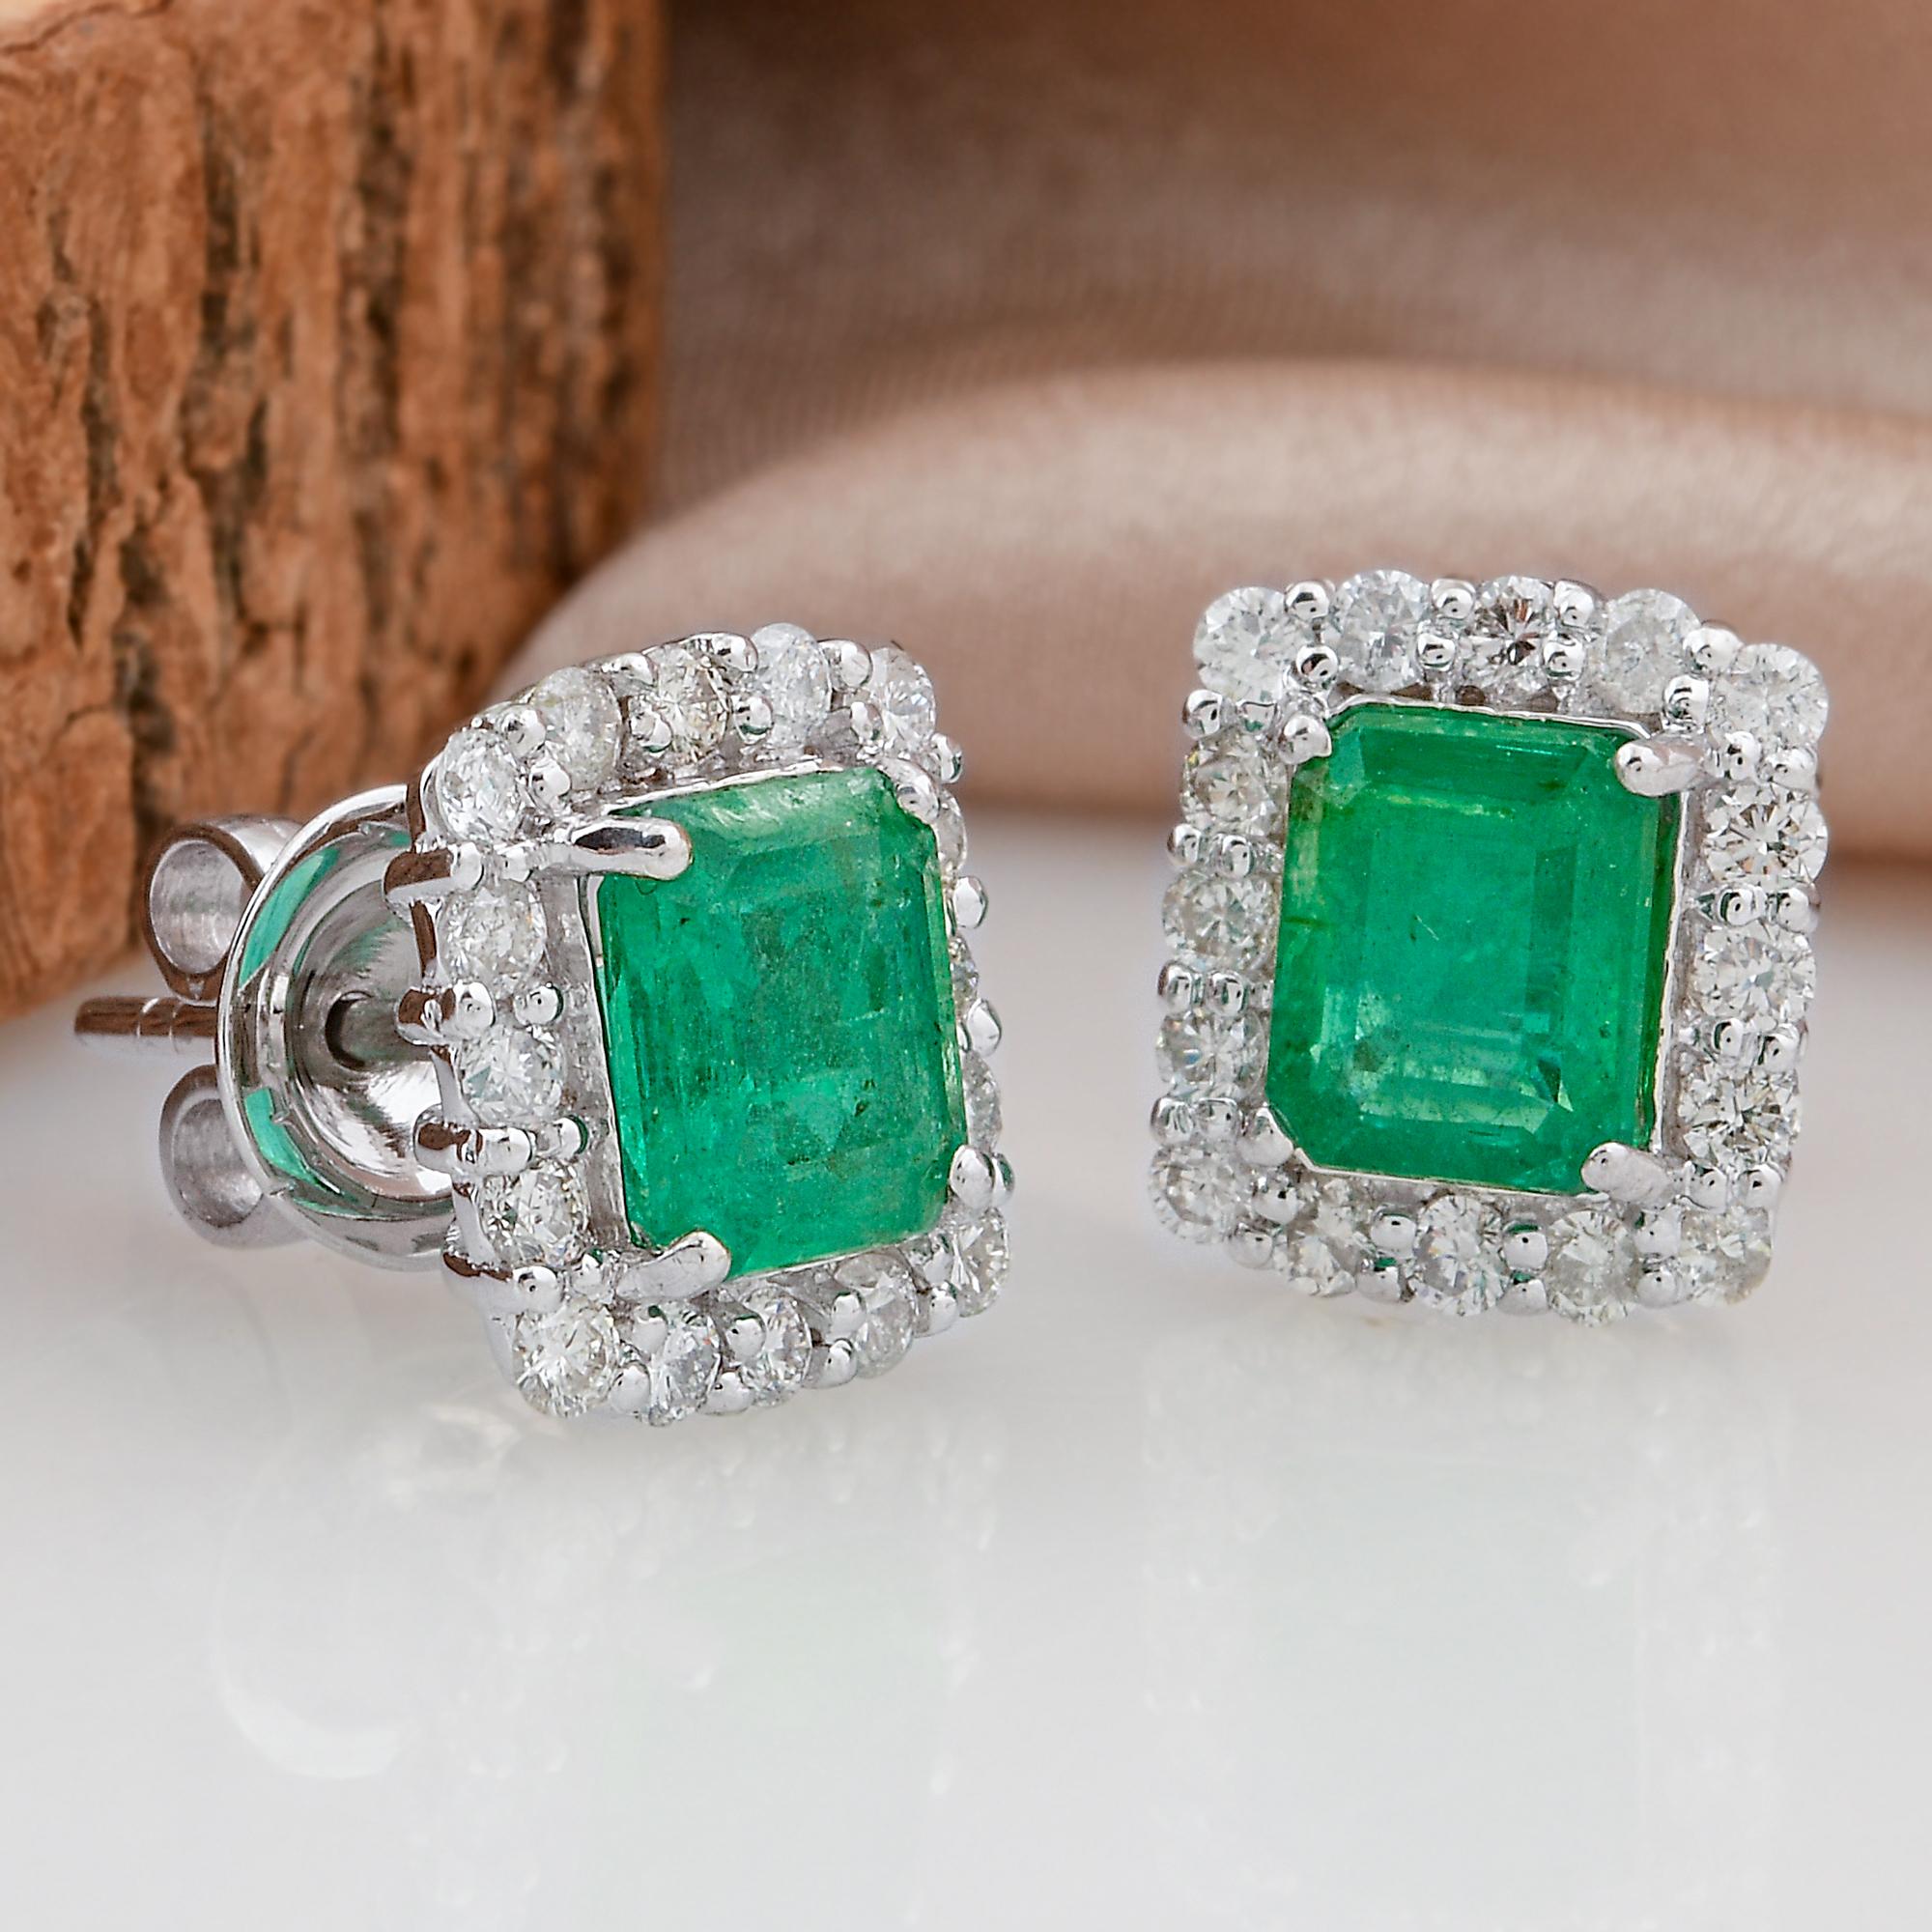 Crafted in 18 Karat White Gold, the setting of these earrings enhances their elegance and timelessness. The lustrous white gold perfectly complements the rich green of the emeralds and the brilliance of the diamonds, creating a harmonious and